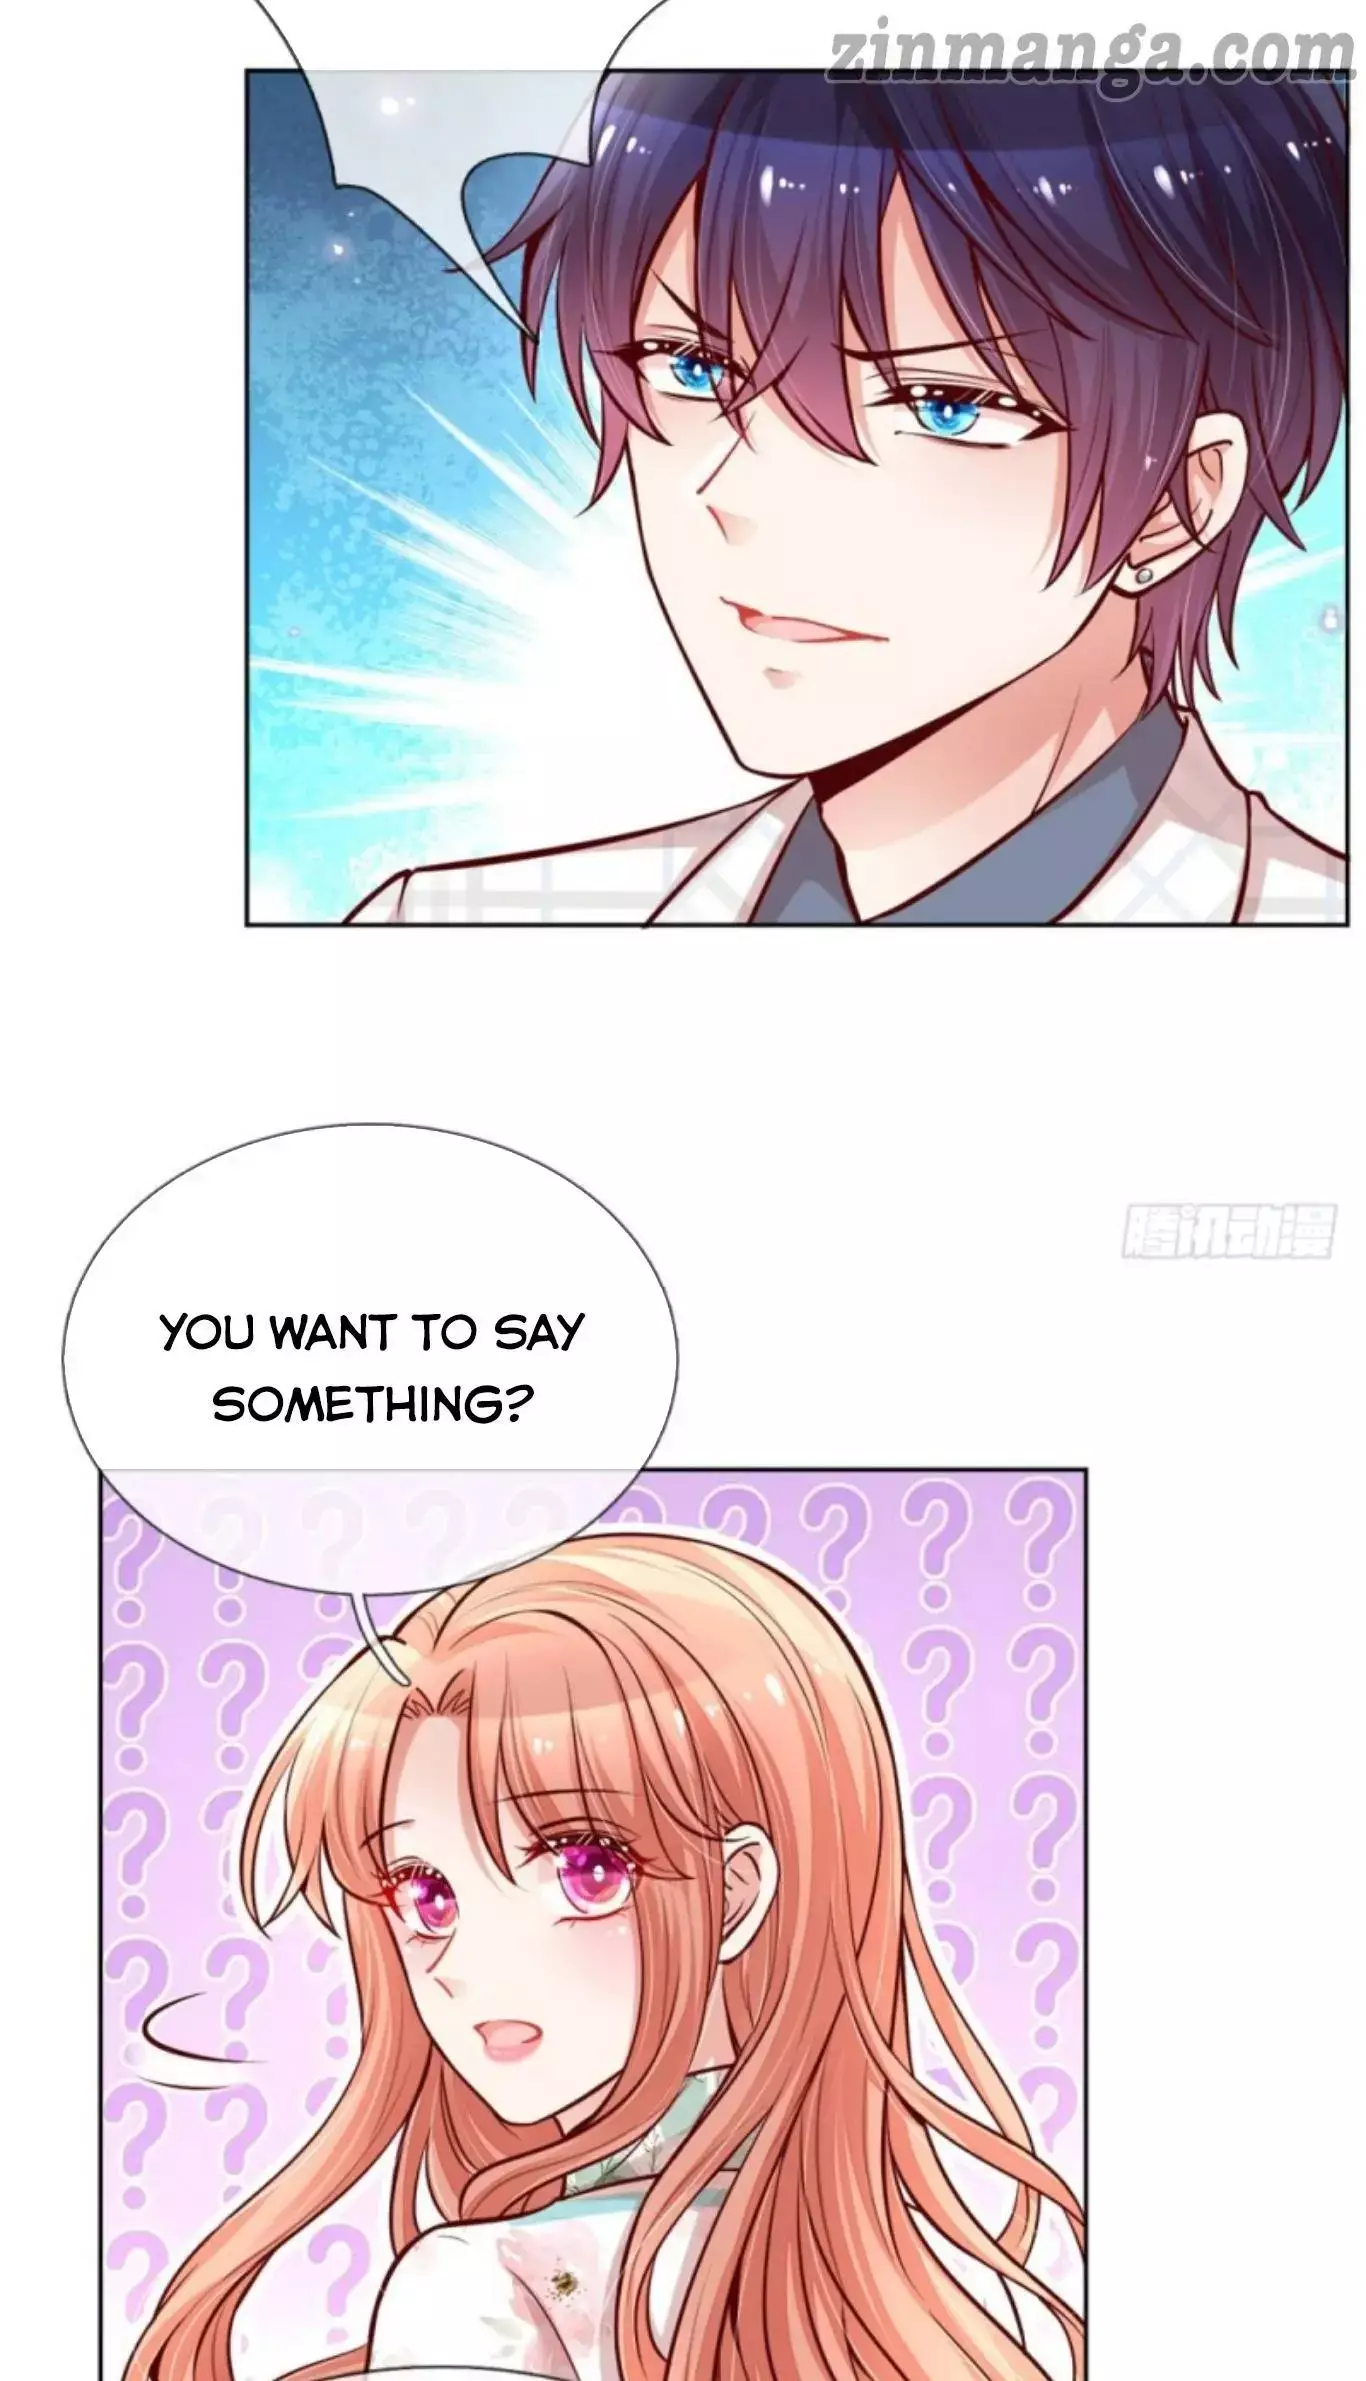 Sweet Escape (Manhua) - 96 page 2